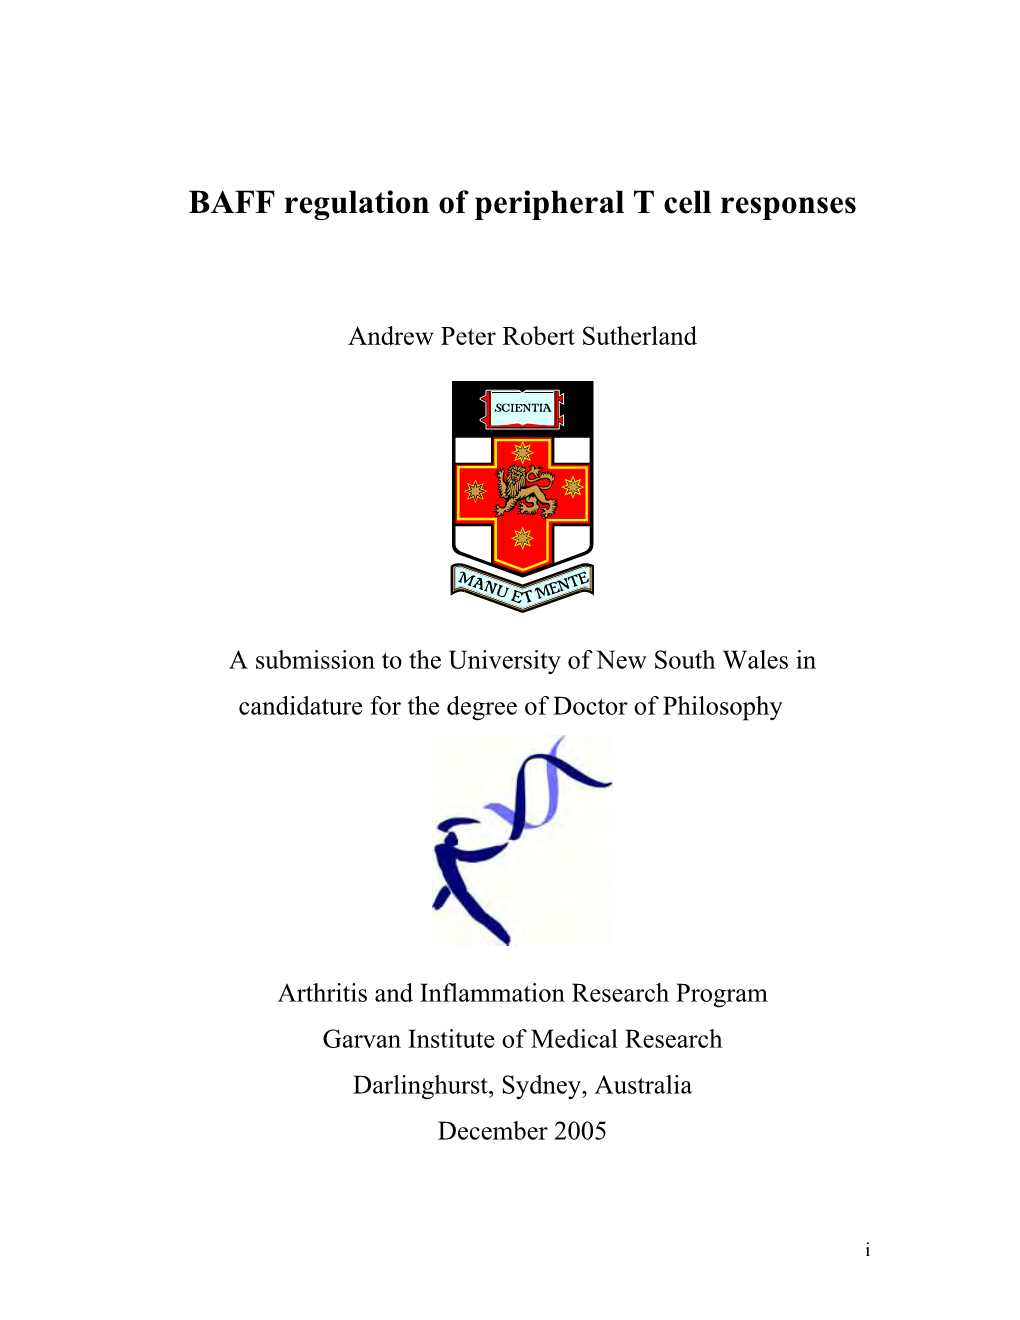 BAFF Regulation of Peripheral T Cell Responses